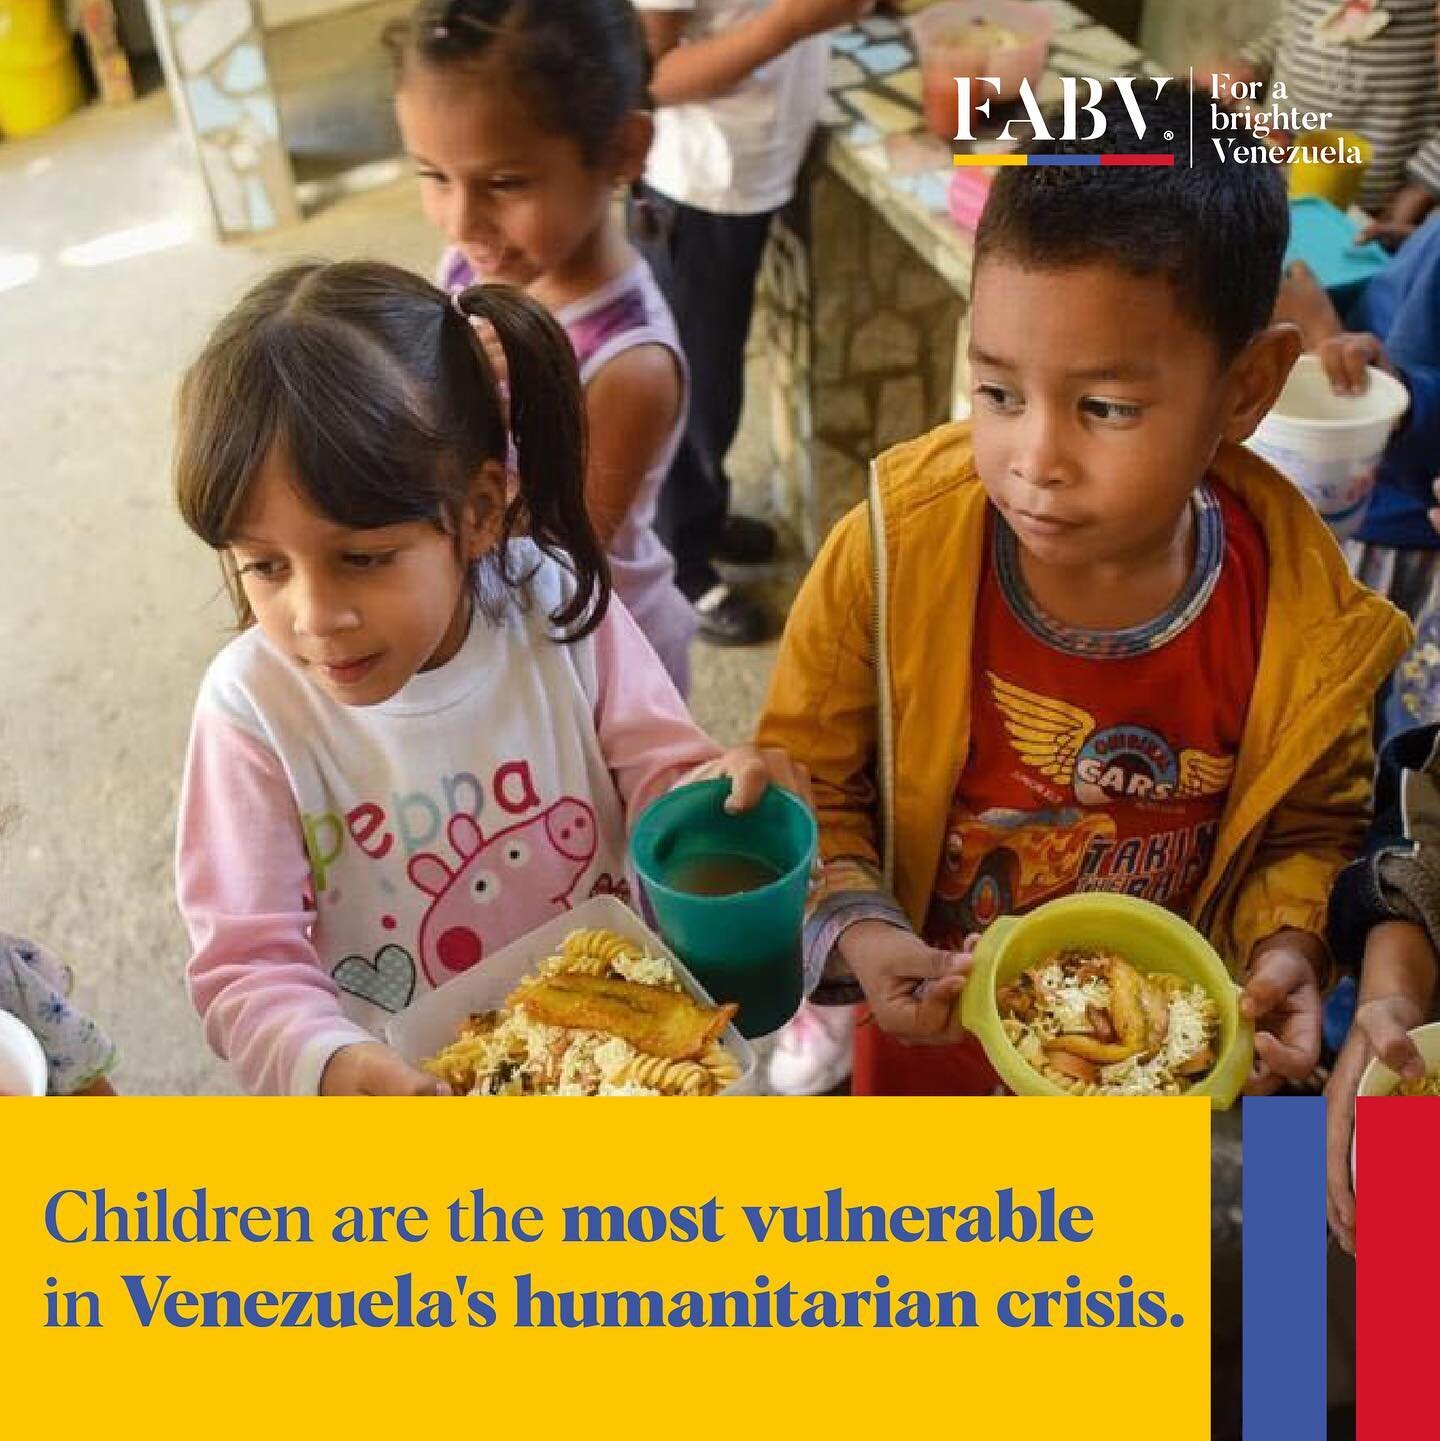 Our desire to contribute to address the humanitarian crisis in Venezuela, has led us to create a platform through which children are looked after.

Today we have not only carried out events and fundraisings in NYC, but we have also partnered with Ven